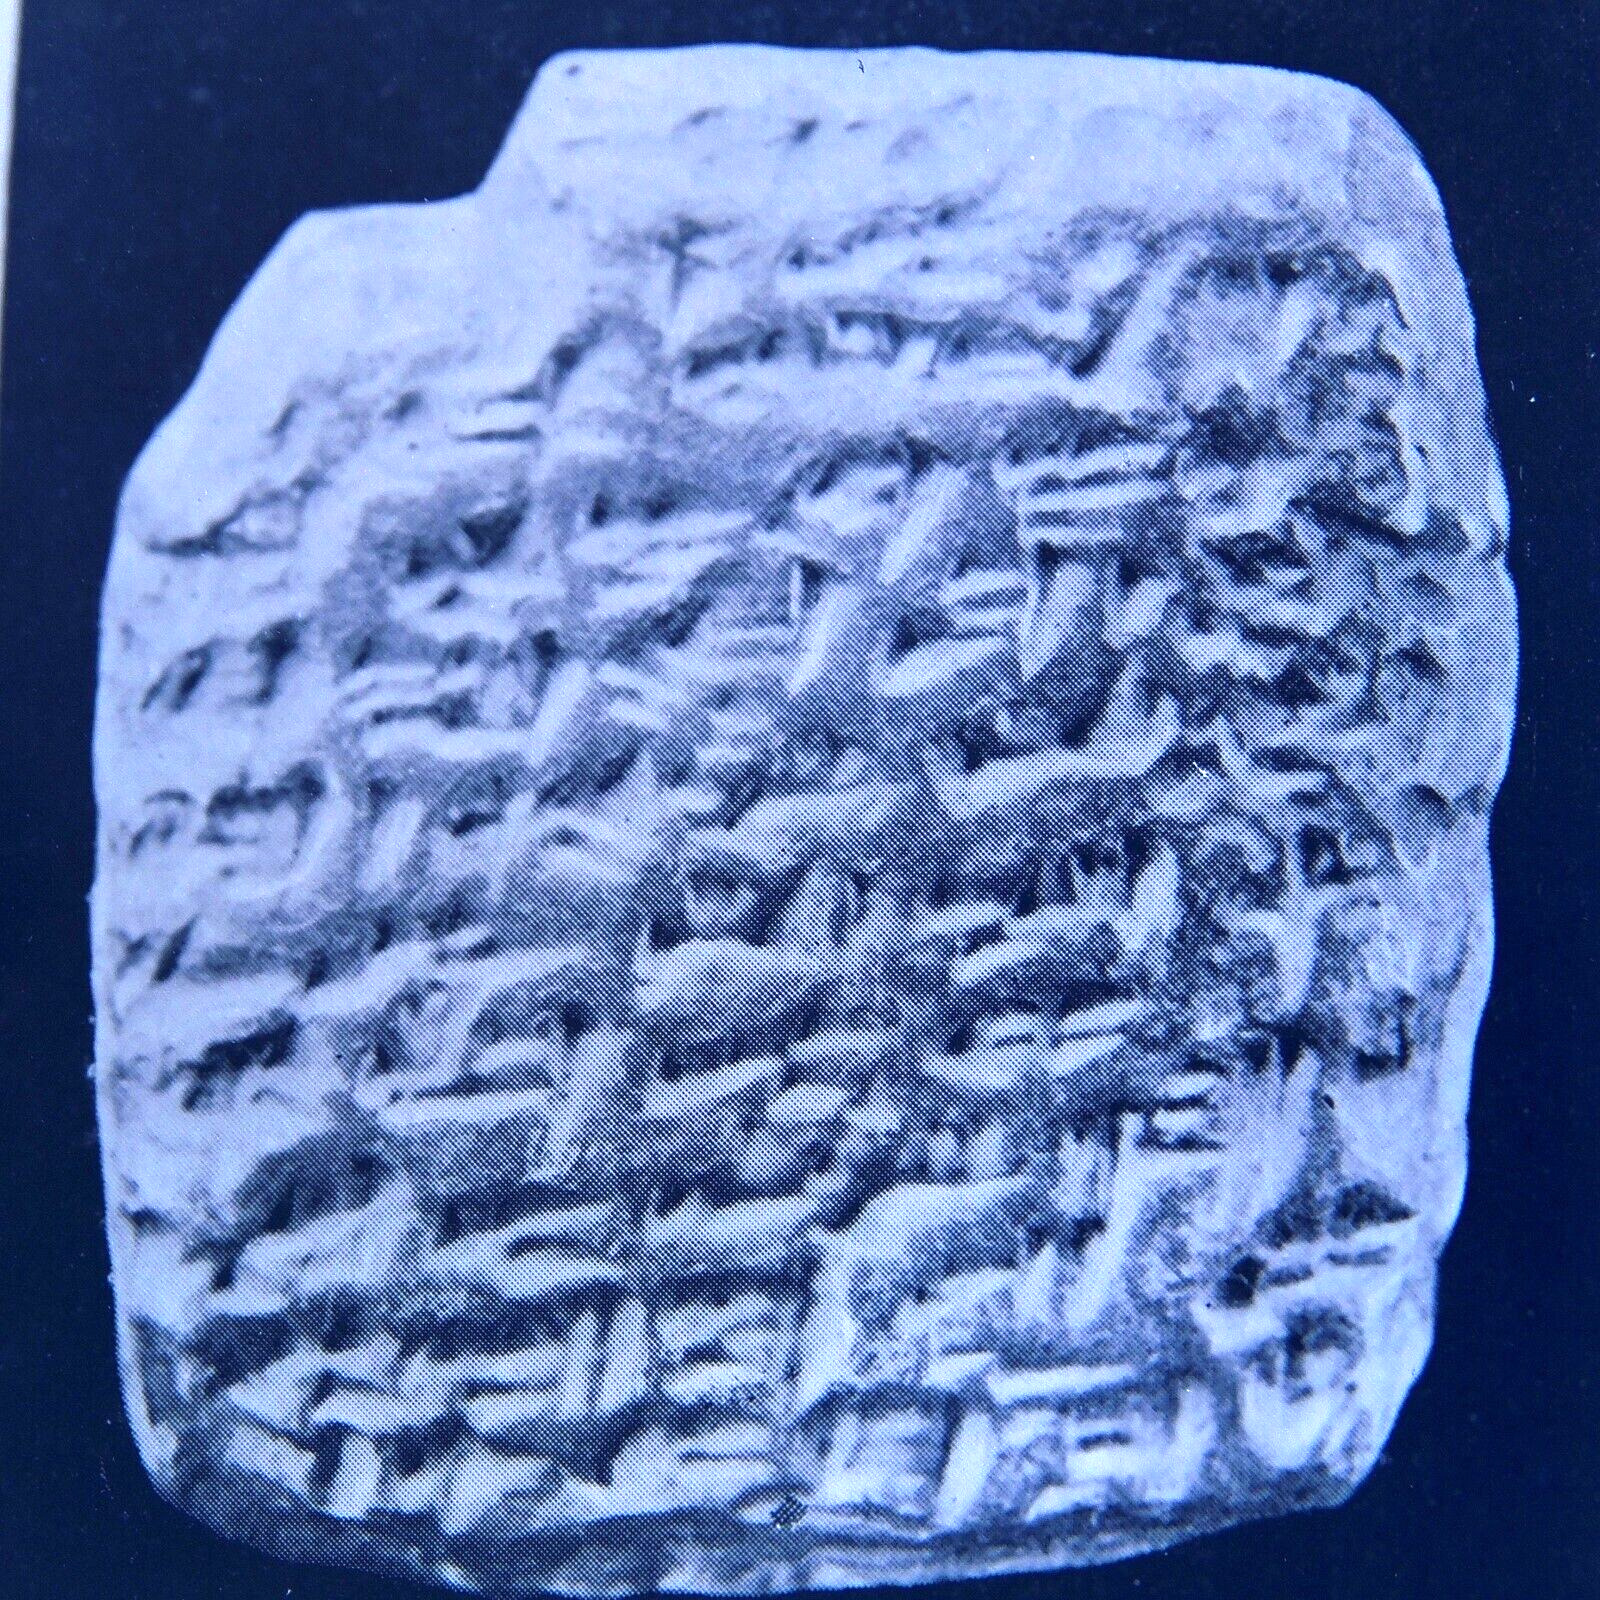 c.1900s Glass Plate Negative Ancient Cuniform Tablet from Lachish 4x5